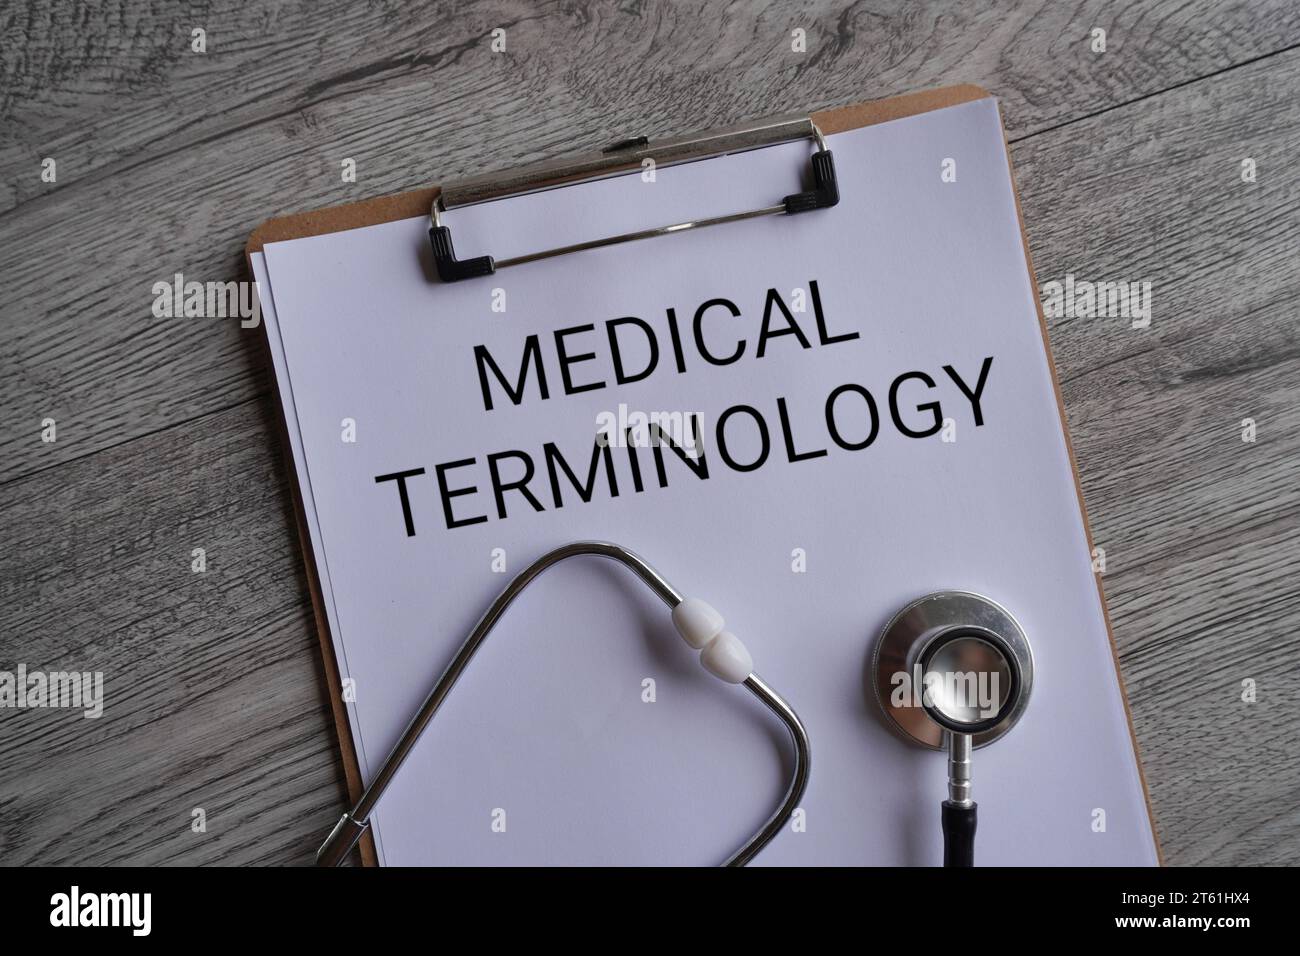 Top view image of stethoscope and paper clipboard with text MEDICAL TERMINOLOGY. Medical and healthcare concept. Stock Photo